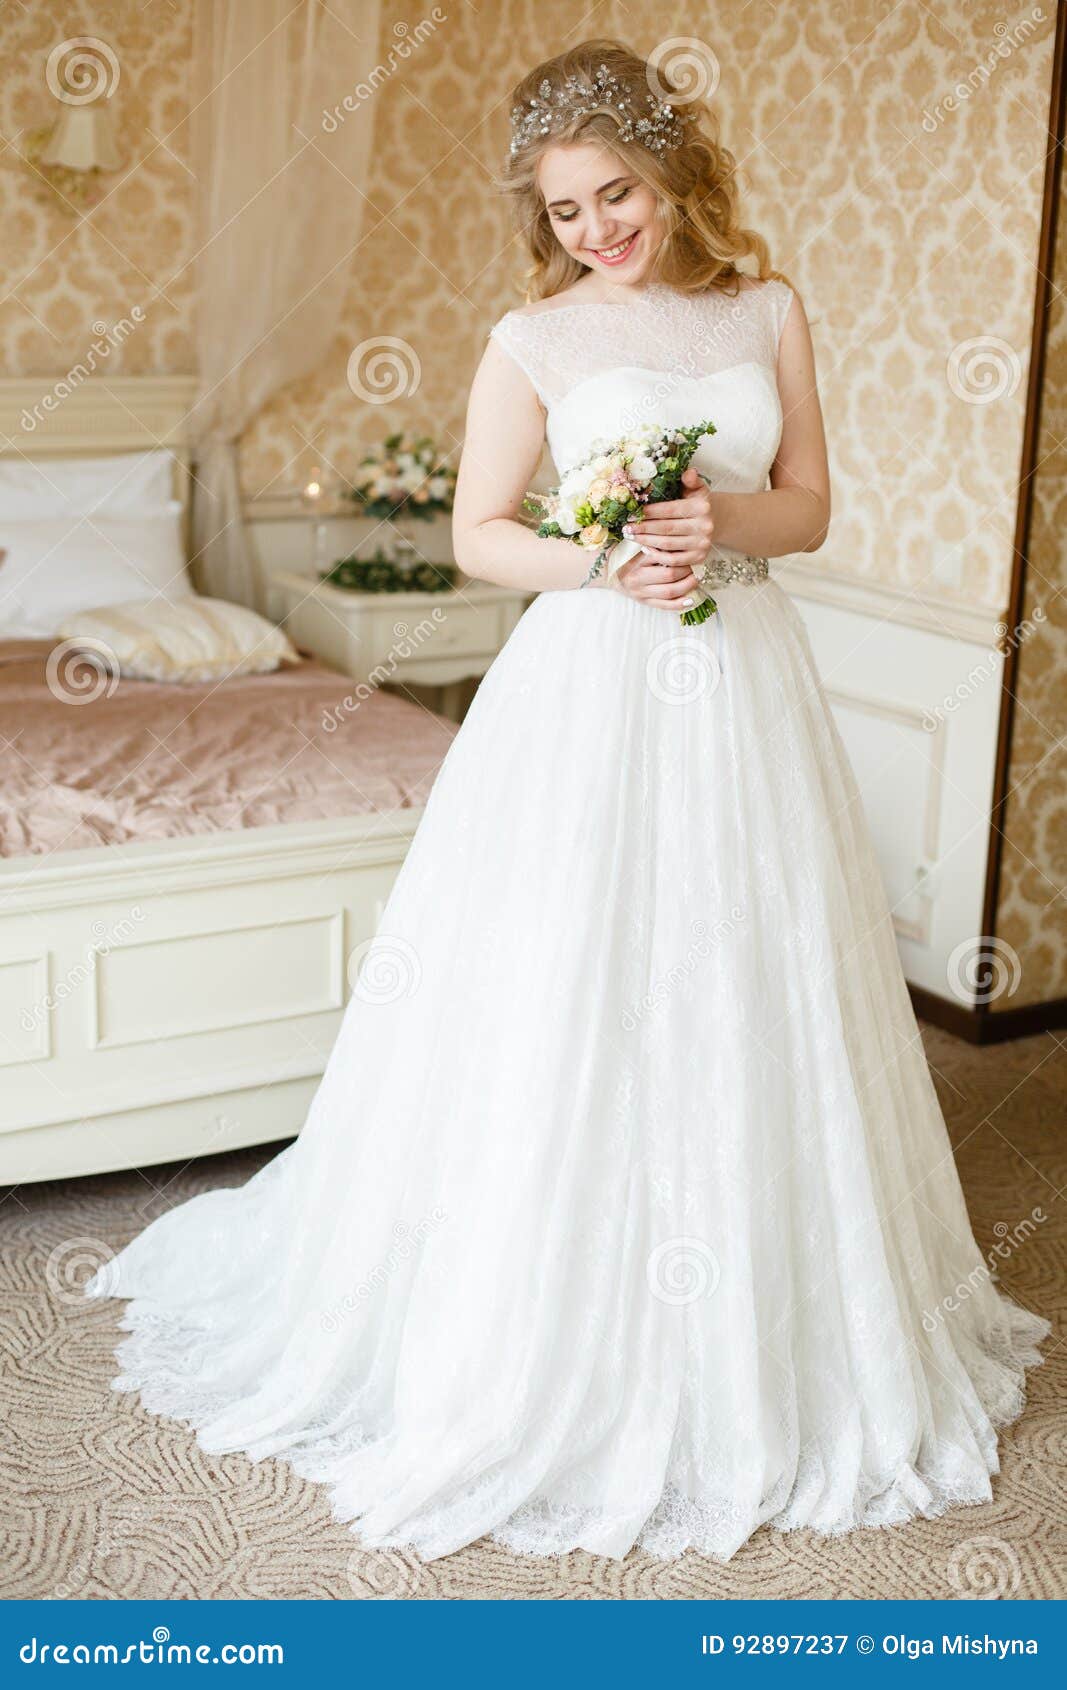 866 Wedding Negligee Stock Photos - Free & Royalty-Free Stock Photos from  Dreamstime